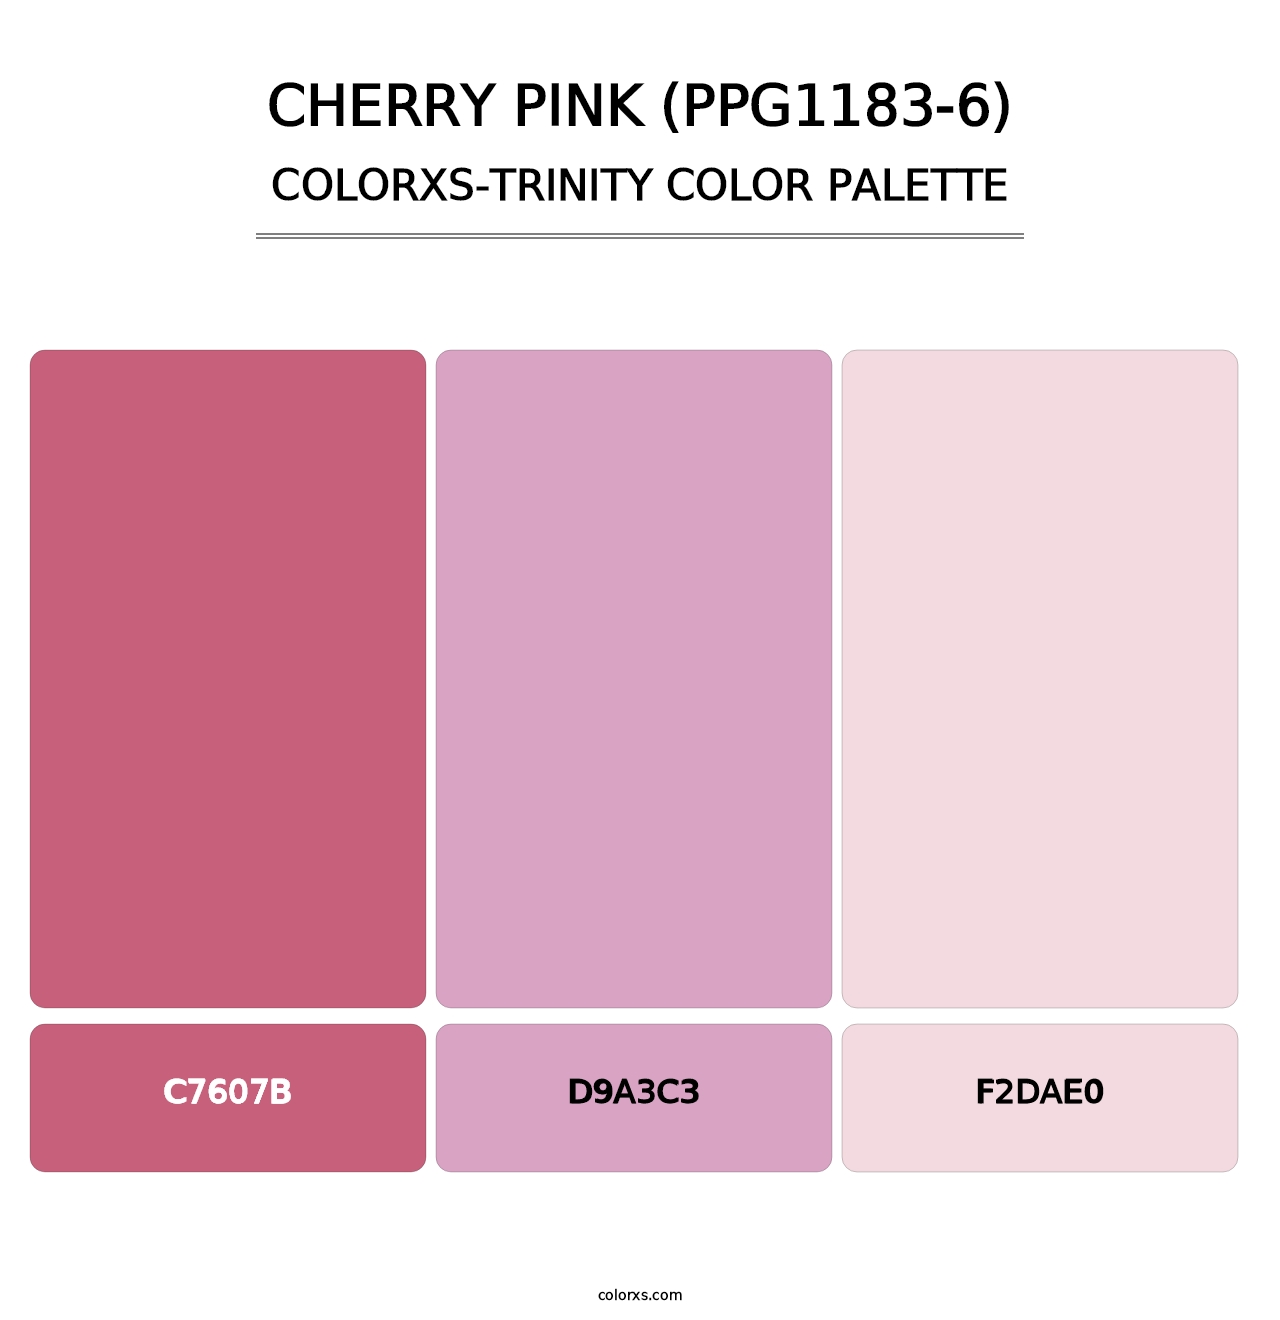 Cherry Pink (PPG1183-6) - Colorxs Trinity Palette